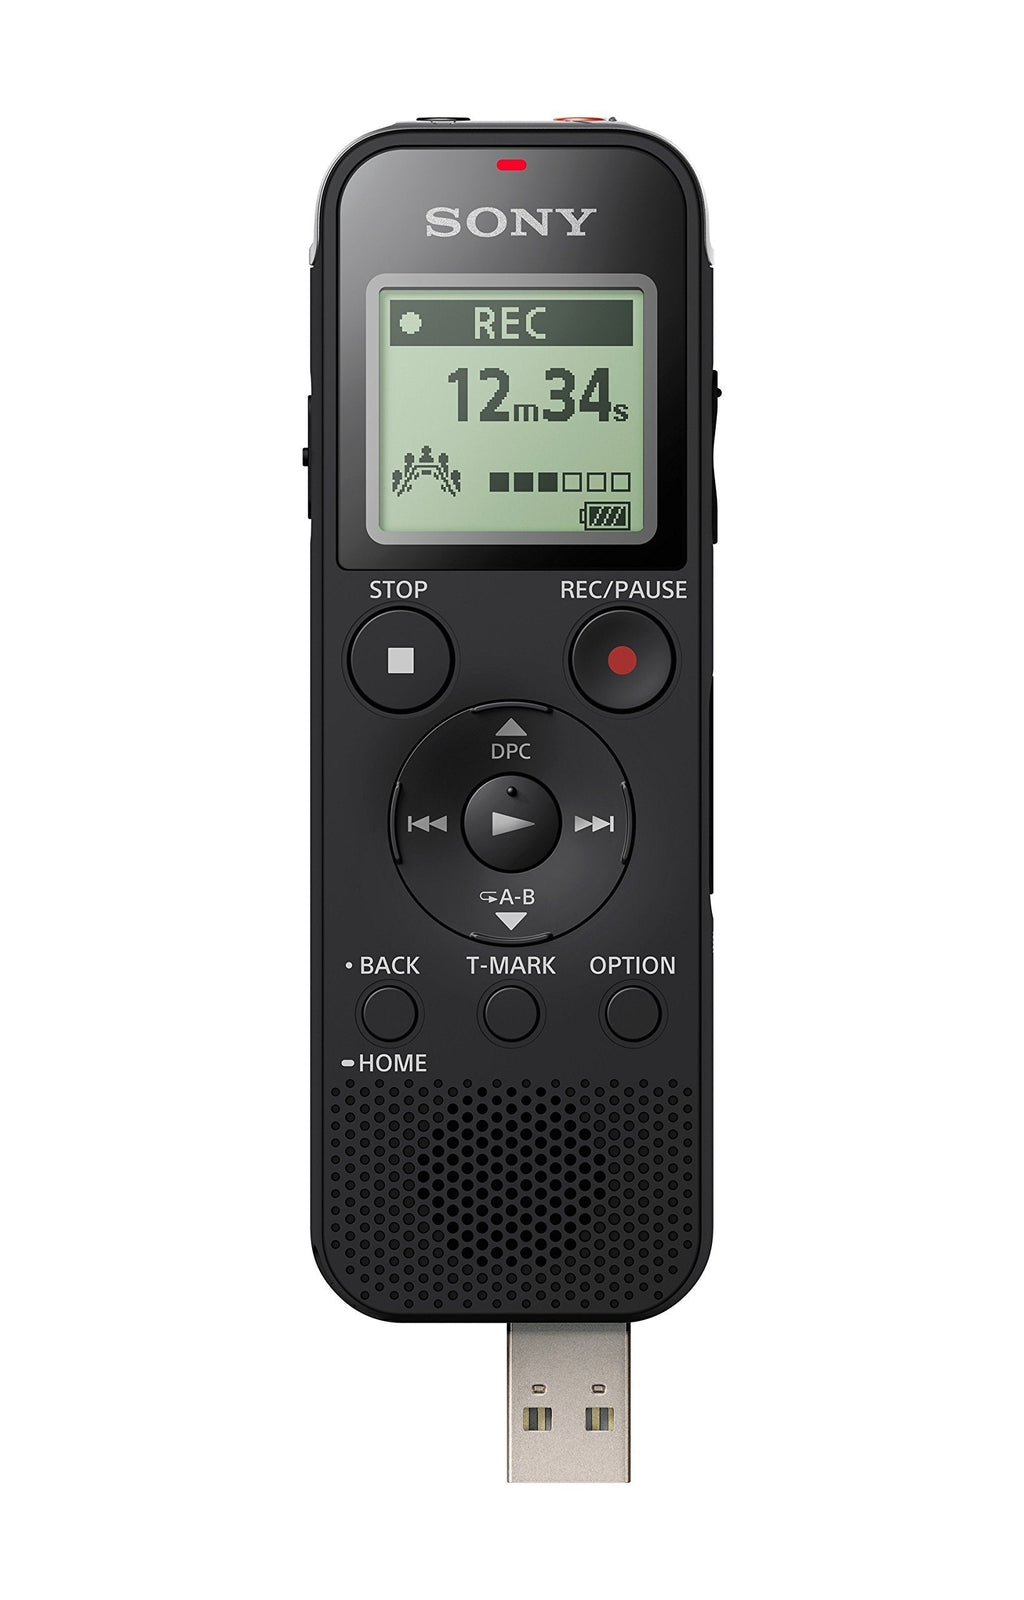  [AUSTRALIA] - Sony ICD-PX470 Stereo Digital Voice Recorder with Built-in USB Voice Recorder, Black PX470 - Stereo Recorder